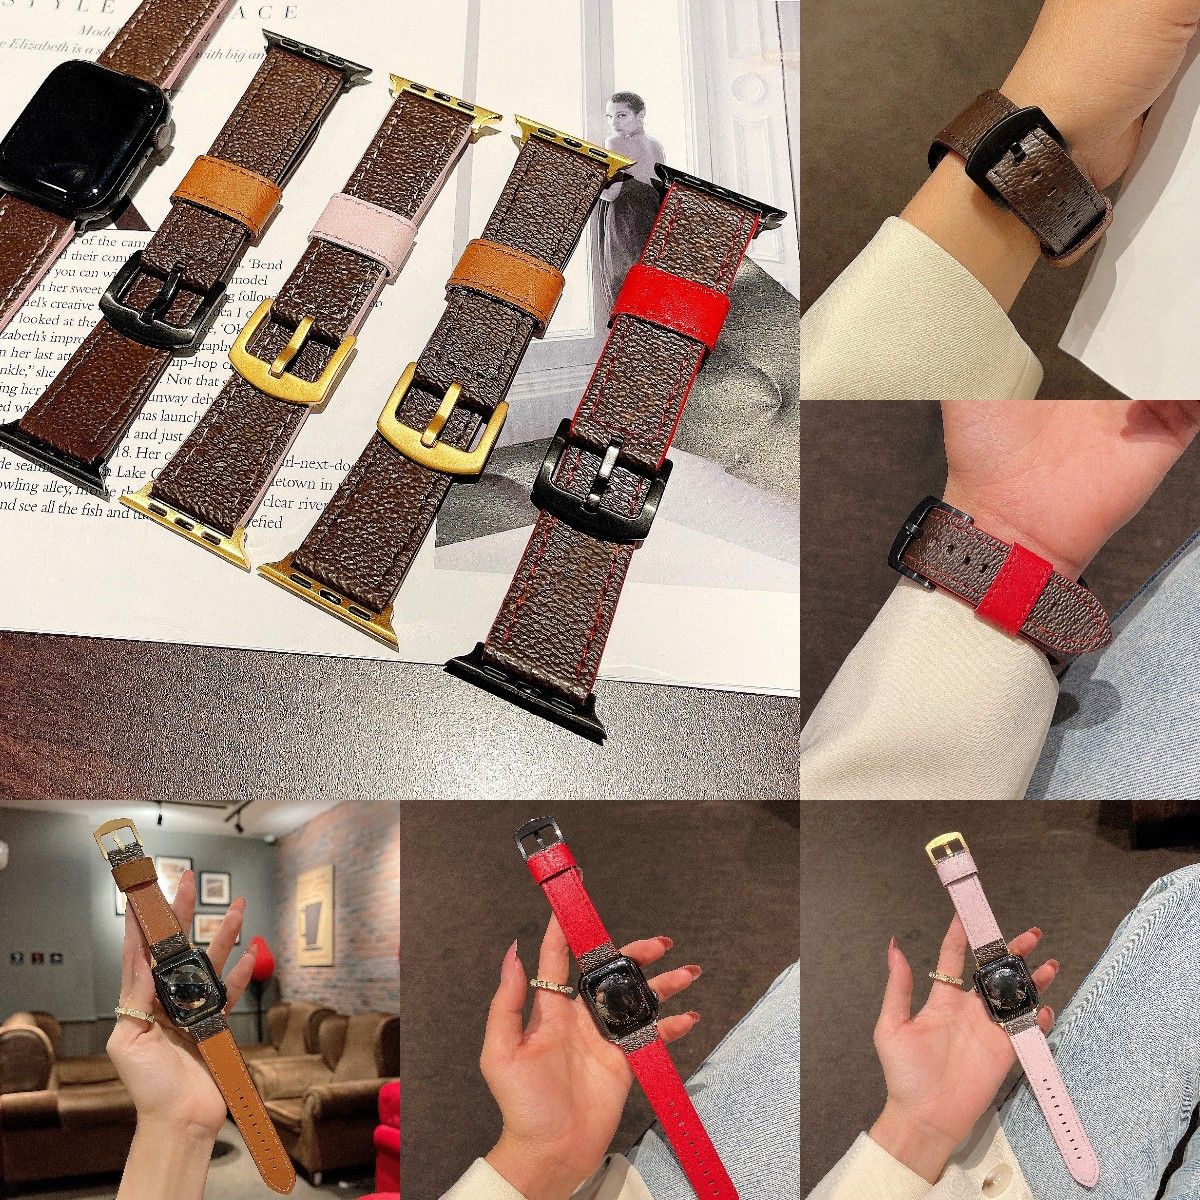 Genuin Luxury Leather Strap for Apple Watch Series 7 6 5 4 3 SE Watch Bands  for iWatch 38MM 40MM 42MM 44MM Bracelet Correa Wrist